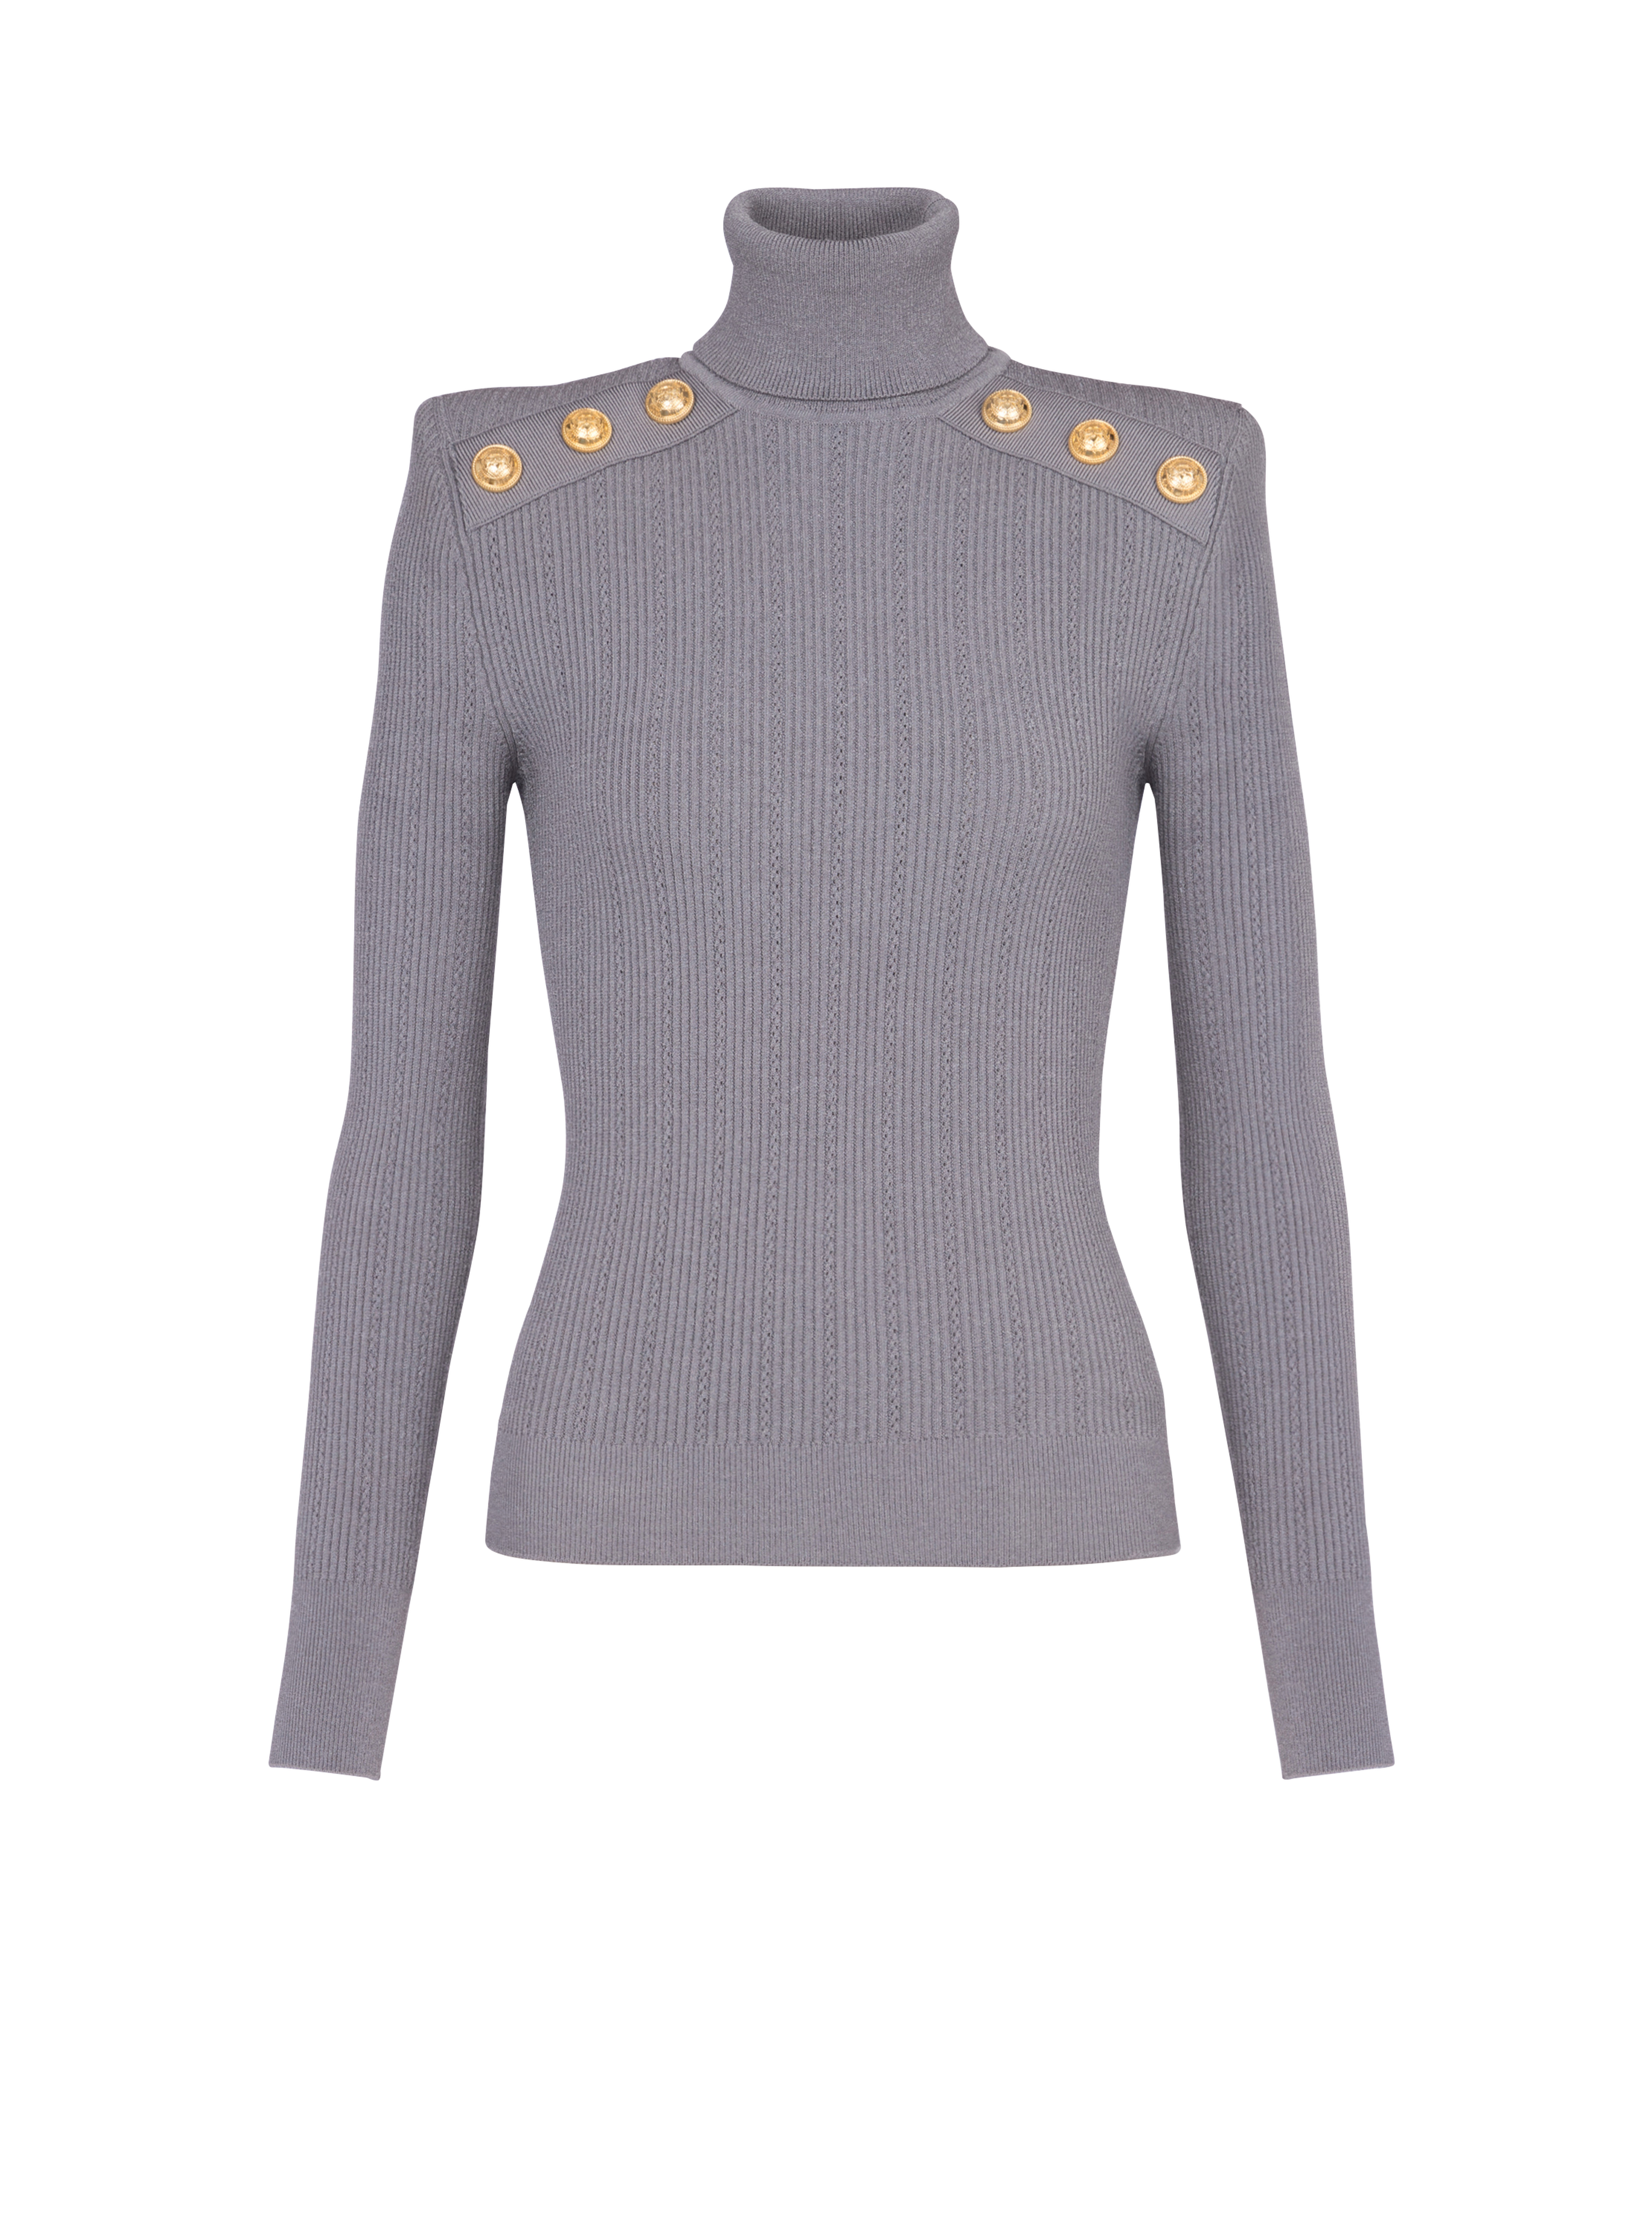 Knit jumper with gold buttons, grey